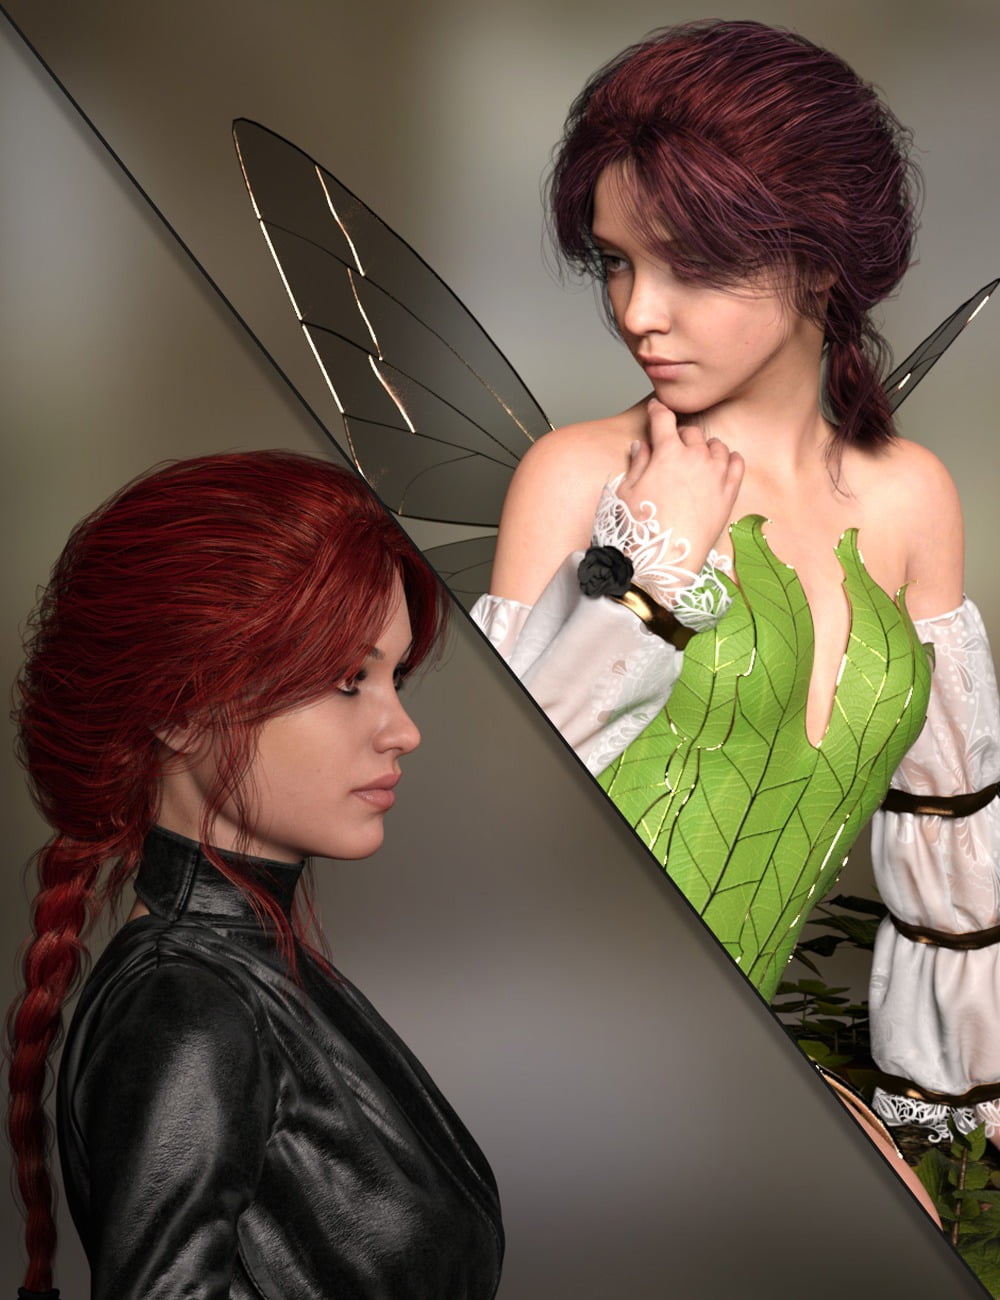 MRL Messy Hair Pack 1 For Genesis 8 and 8.1 Females